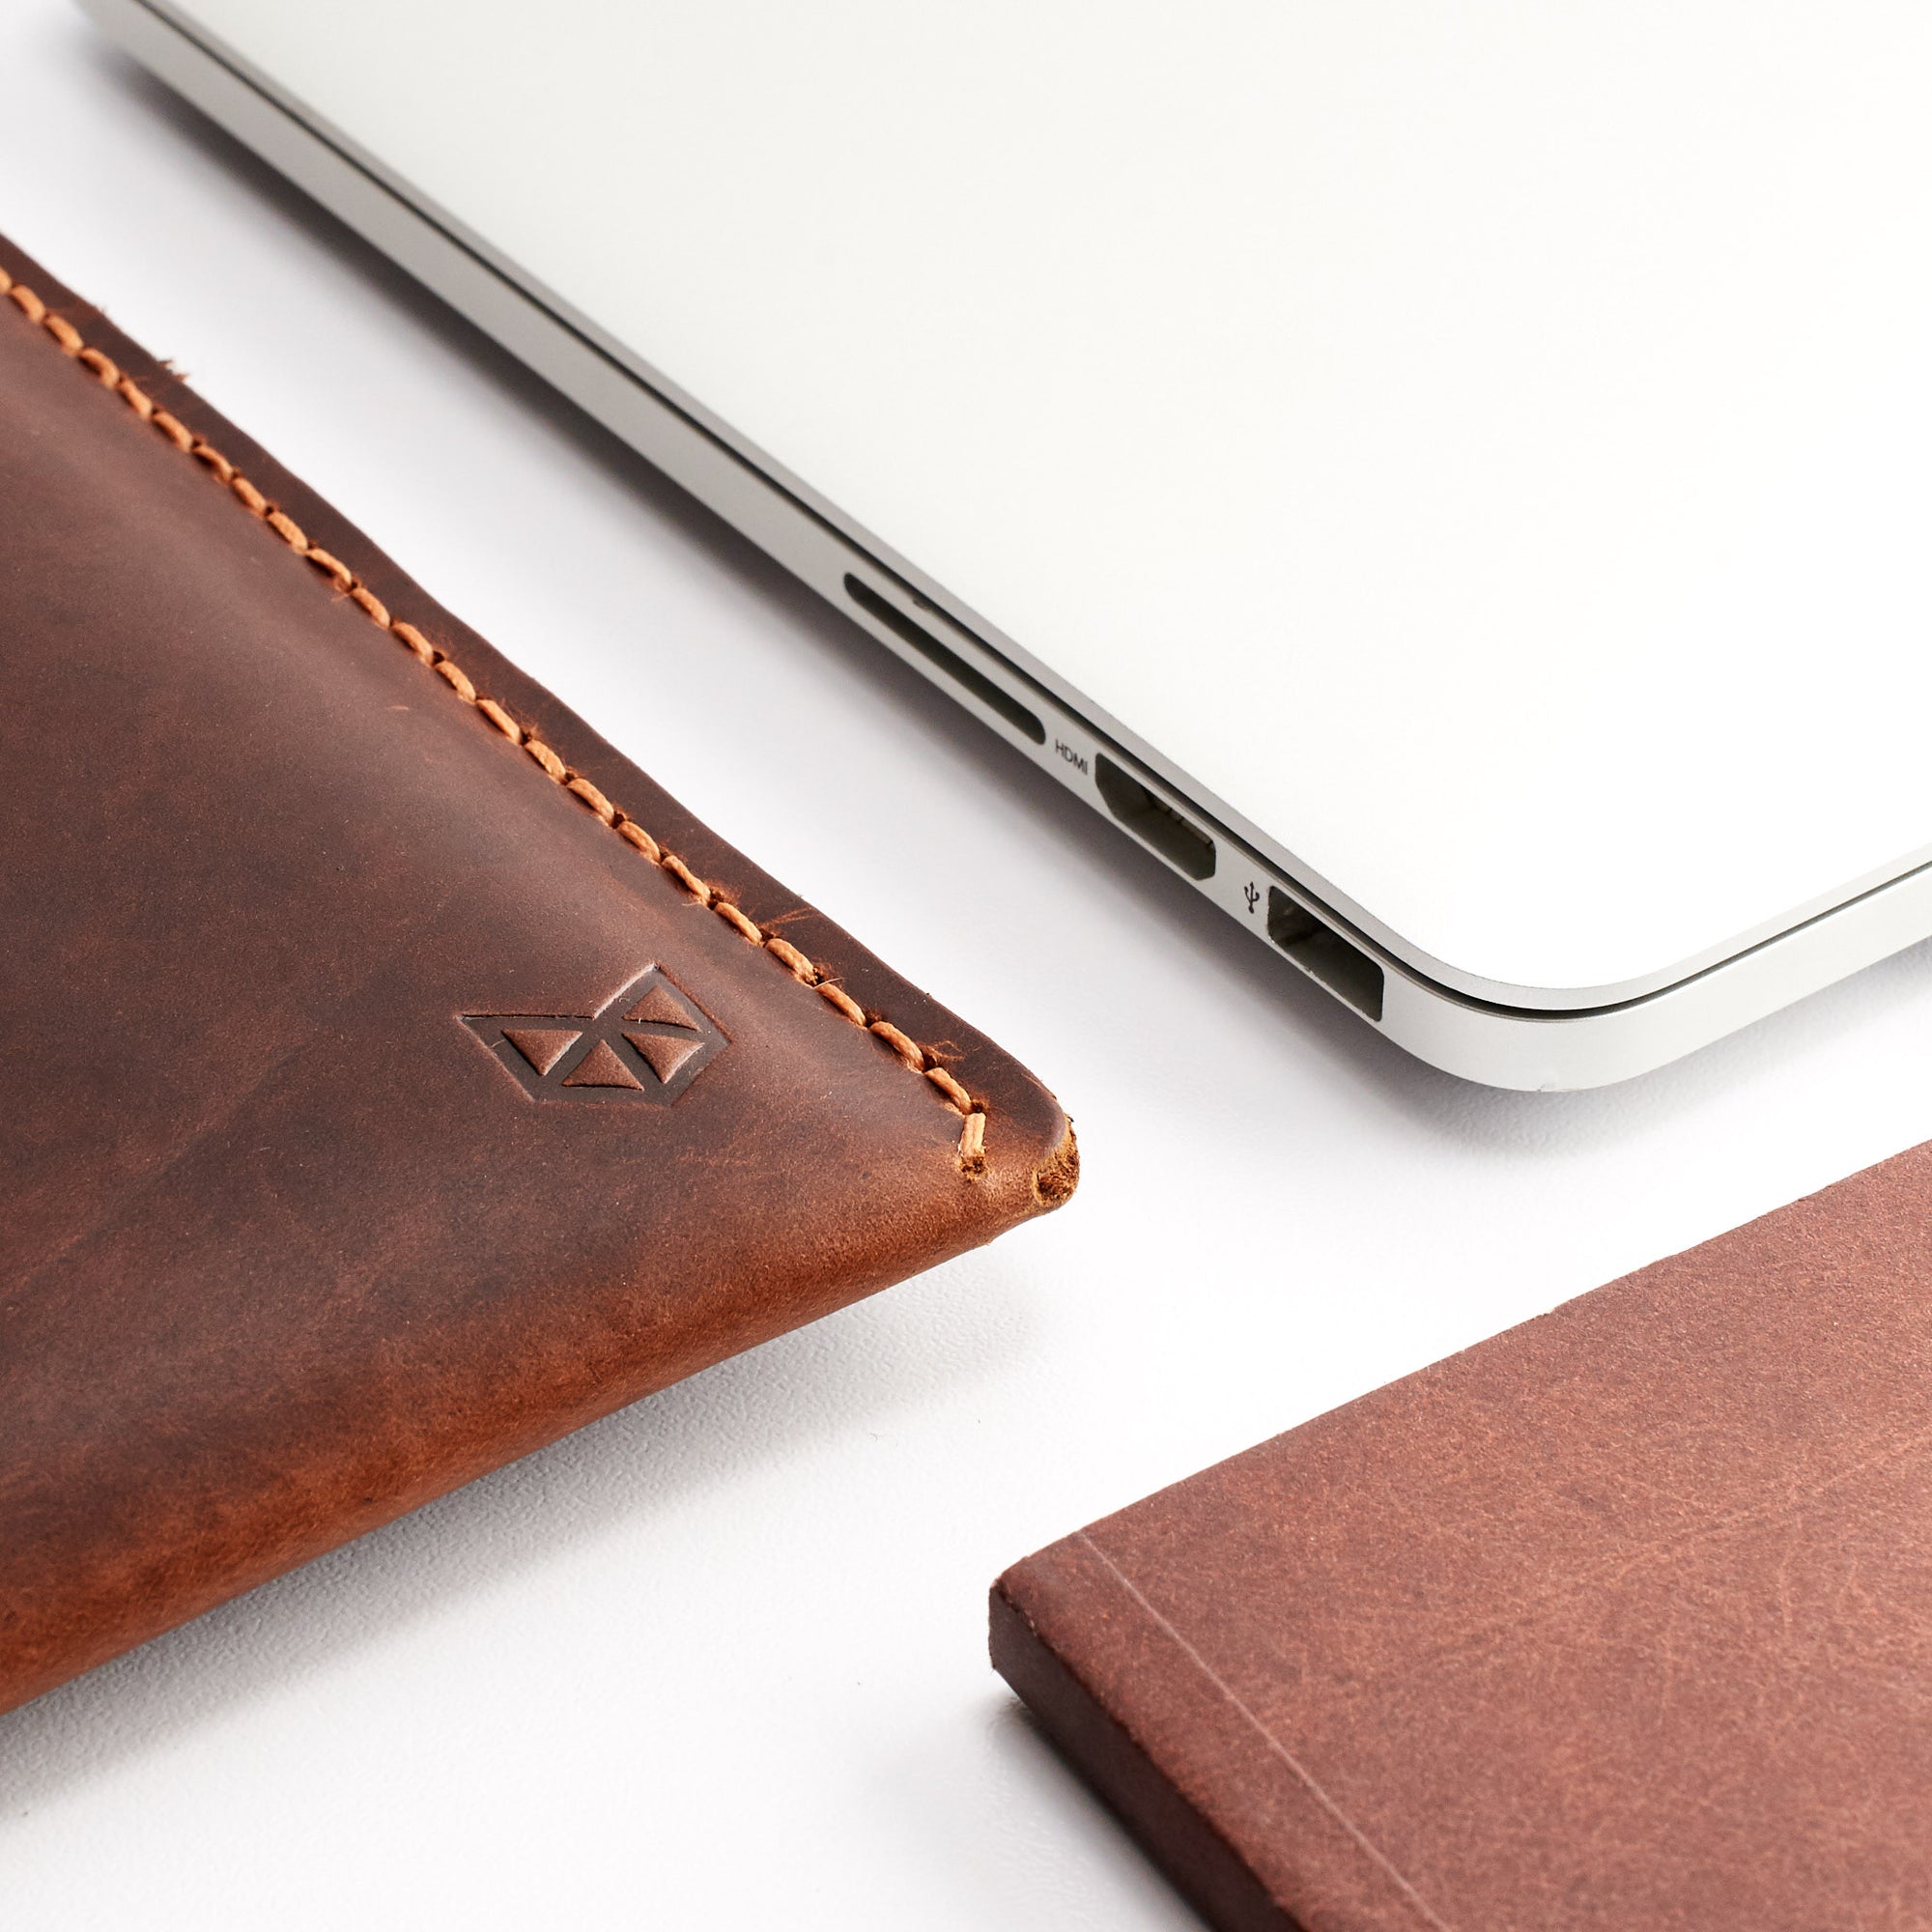 Hand Stitch. Distressed Tan Leather MacBook Case. MacBook Sleeve by Capra Leather